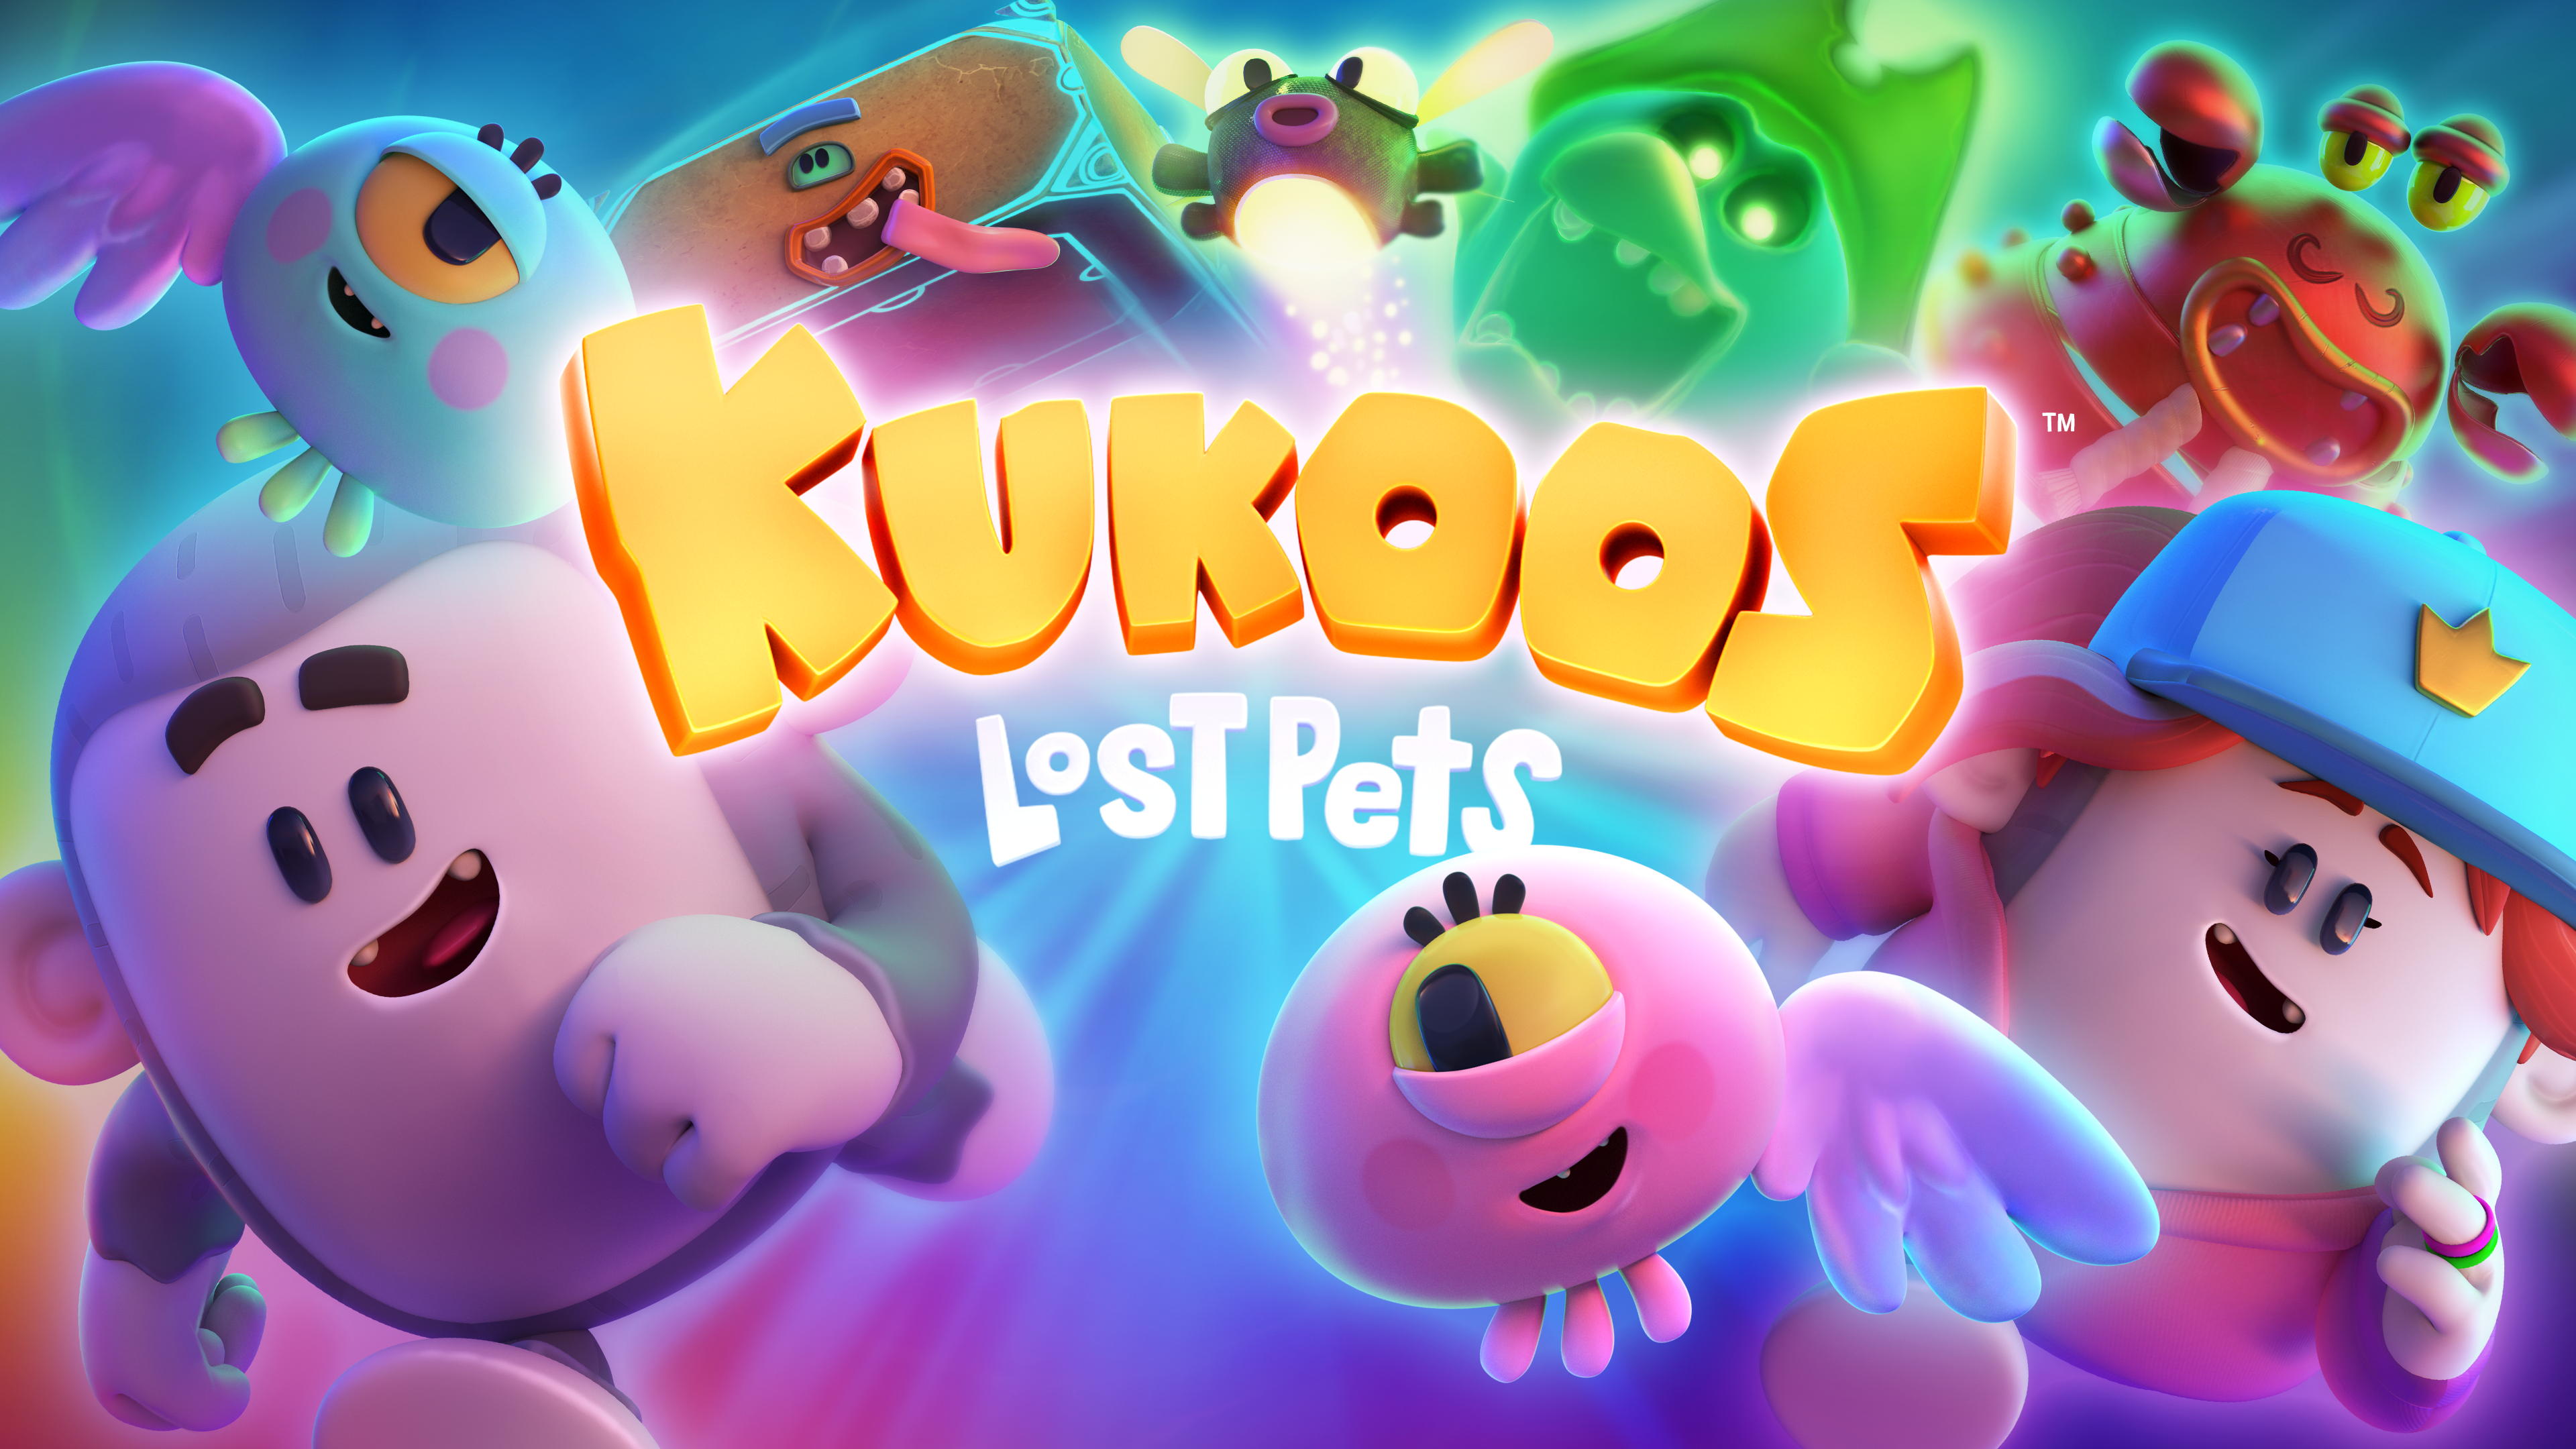 Video Game Kukoos: Lost Pets HD Wallpaper | Background Image